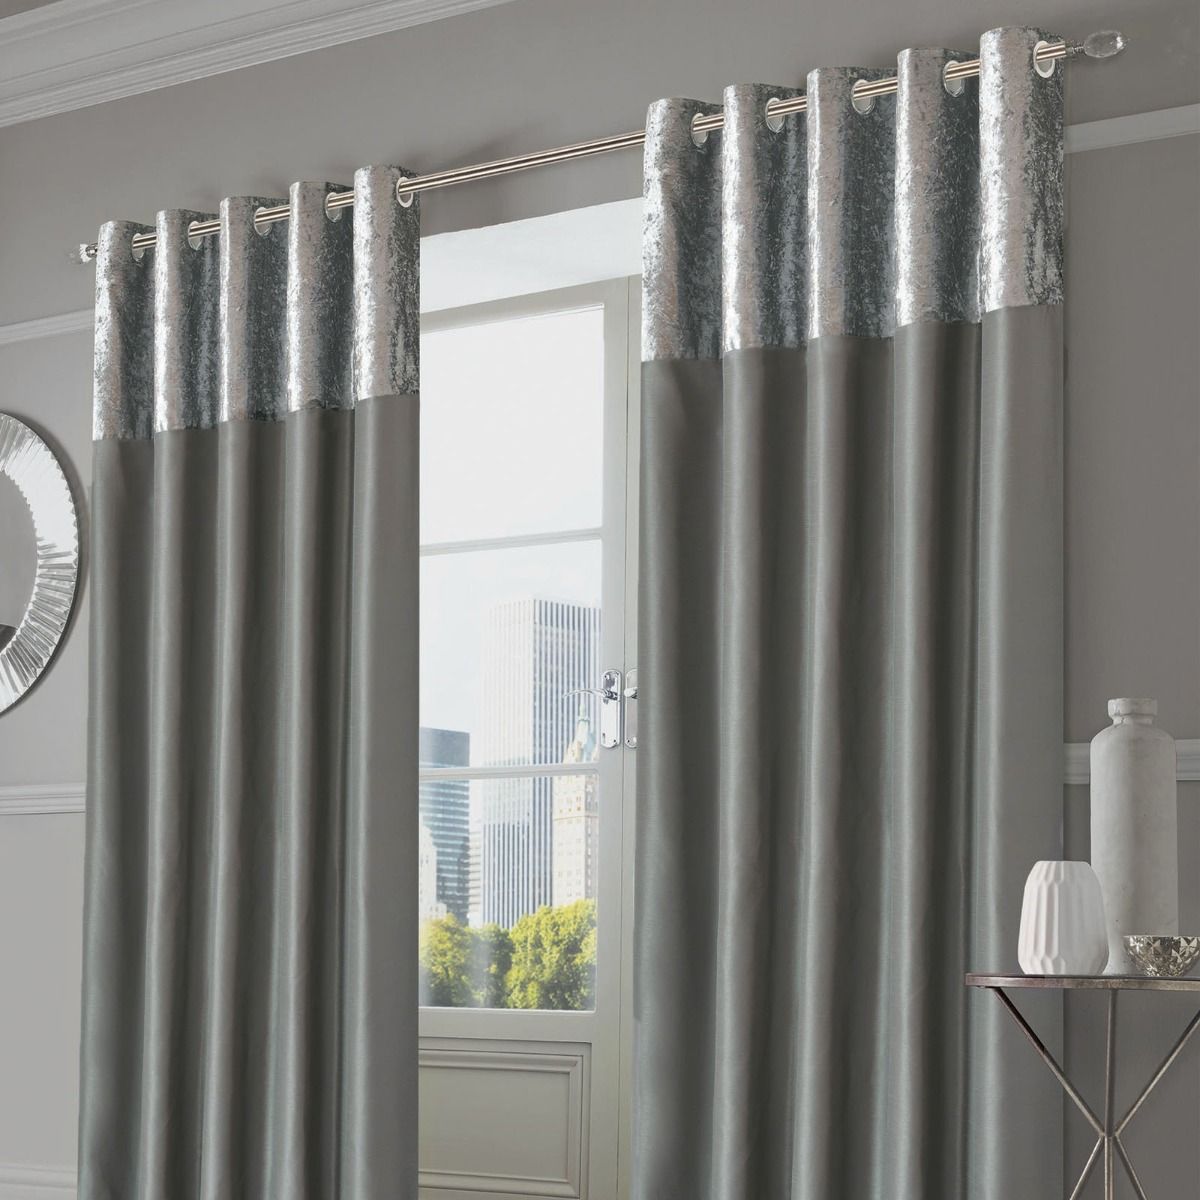 Sienna Home Crushed Velvet Band Eyelet Curtains, Silver Grey - 66"x54"